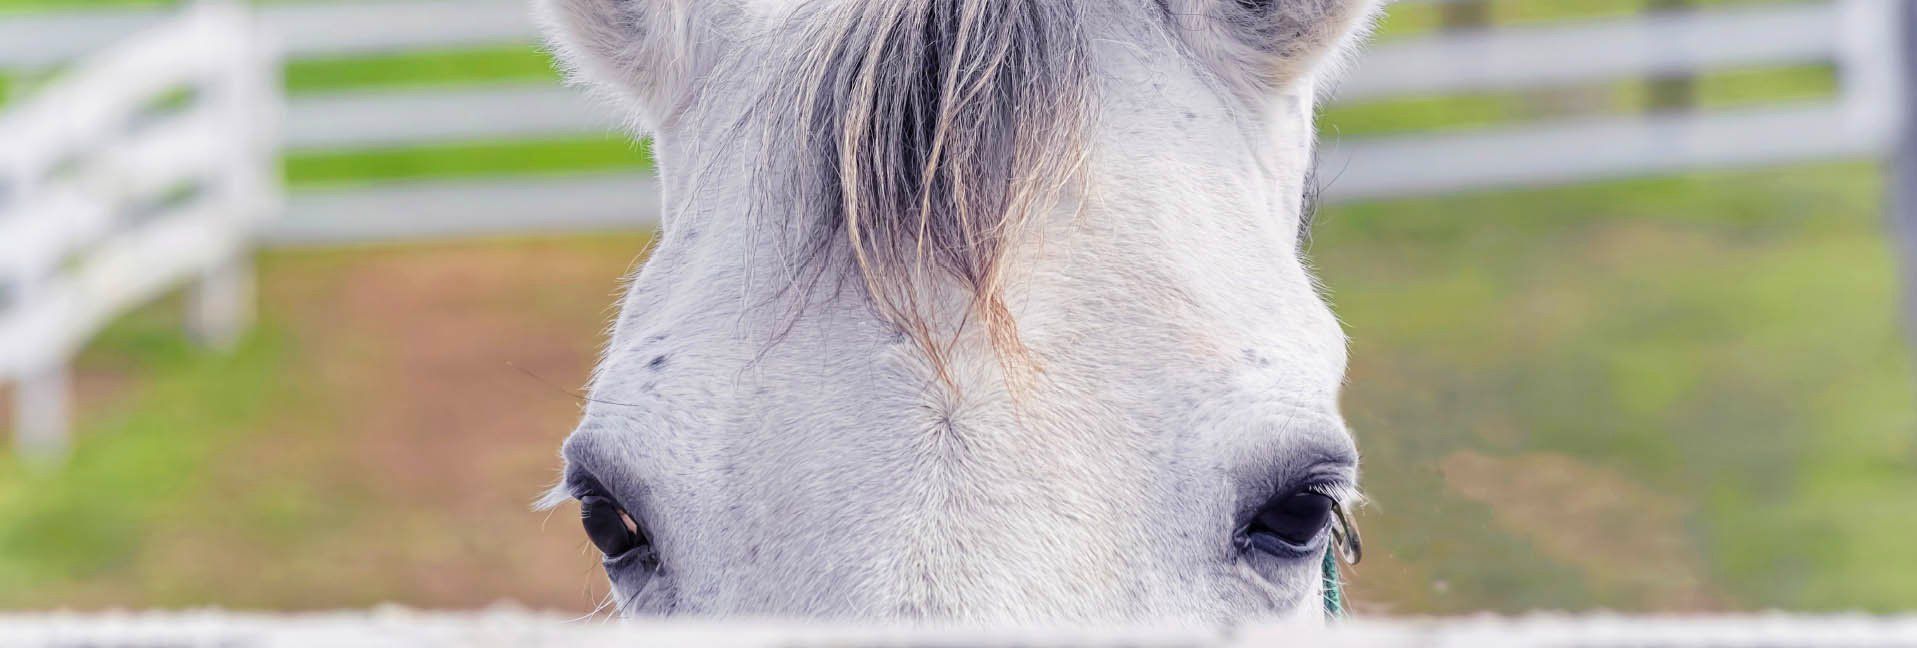 Listen UP, Your horse can talk to you – No, really!